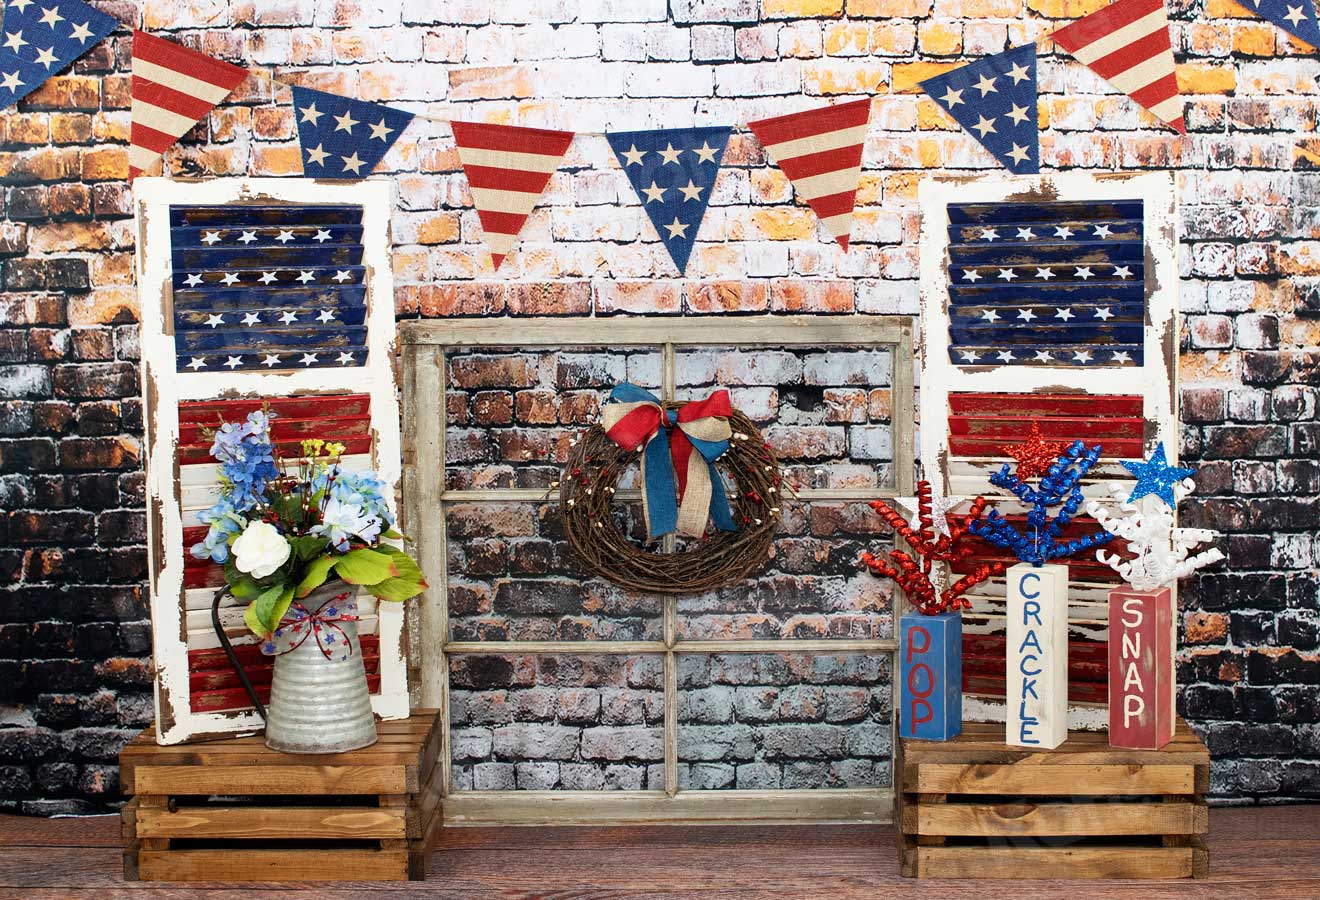 Kate Retro Brick with Window Decorations Independence Day Backdrop for Photography Designed by Leann West